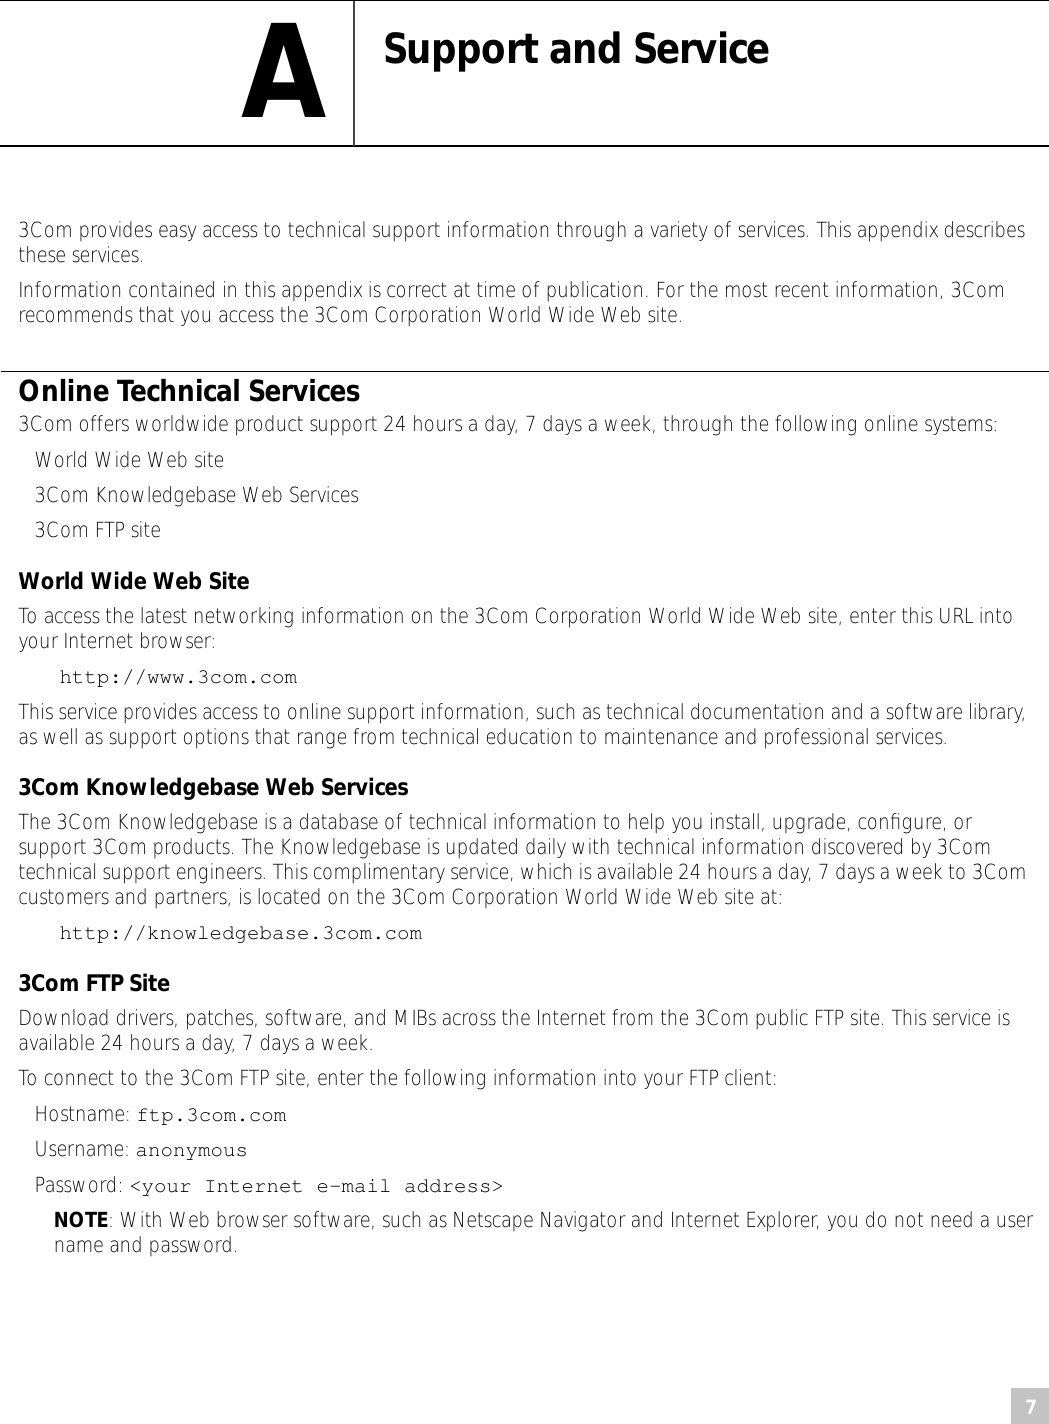  7 A Support and Service 3Com provides easy access to technical support information through a variety of services. This appendix describes these services.Information contained in this appendix is correct at time of publication. For the most recent information, 3Com recommends that you access the 3Com Corporation World Wide Web site. Online Technical Services 3Com offers worldwide product support 24 hours a day, 7 days a week, through the following online systems: • World Wide Web site• 3Com Knowledgebase Web Services• 3Com FTP site World Wide Web Site To access the latest networking information on the 3Com Corporation World Wide Web site, enter this URL into your Internet browser: http://www.3com.com This service provides access to online support information, such as technical documentation and a software library, as well as support options that range from technical education to maintenance and professional services. 3Com Knowledgebase Web Services The 3Com Knowledgebase is a database of technical information to help you install, upgrade, conﬁgure, or support 3Com products. The Knowledgebase is updated daily with technical information discovered by 3Com technical support engineers. This complimentary service, which is available 24 hours a day, 7 days a week to 3Com customers and partners, is located on the 3Com Corporation World Wide Web site at: http://knowledgebase.3com.com 3Com FTP Site Download drivers, patches, software, and MIBs across the Internet from the 3Com public FTP site. This service is available 24 hours a day, 7 days a week.To connect to the 3Com FTP site, enter the following information into your FTP client:• Hostname:  ftp.3com.com• Username: anonymous• Password: &lt;your Internet e-mail address&gt;NOTE: With Web browser software, such as Netscape Navigator and Internet Explorer, you do not need a user name and password.